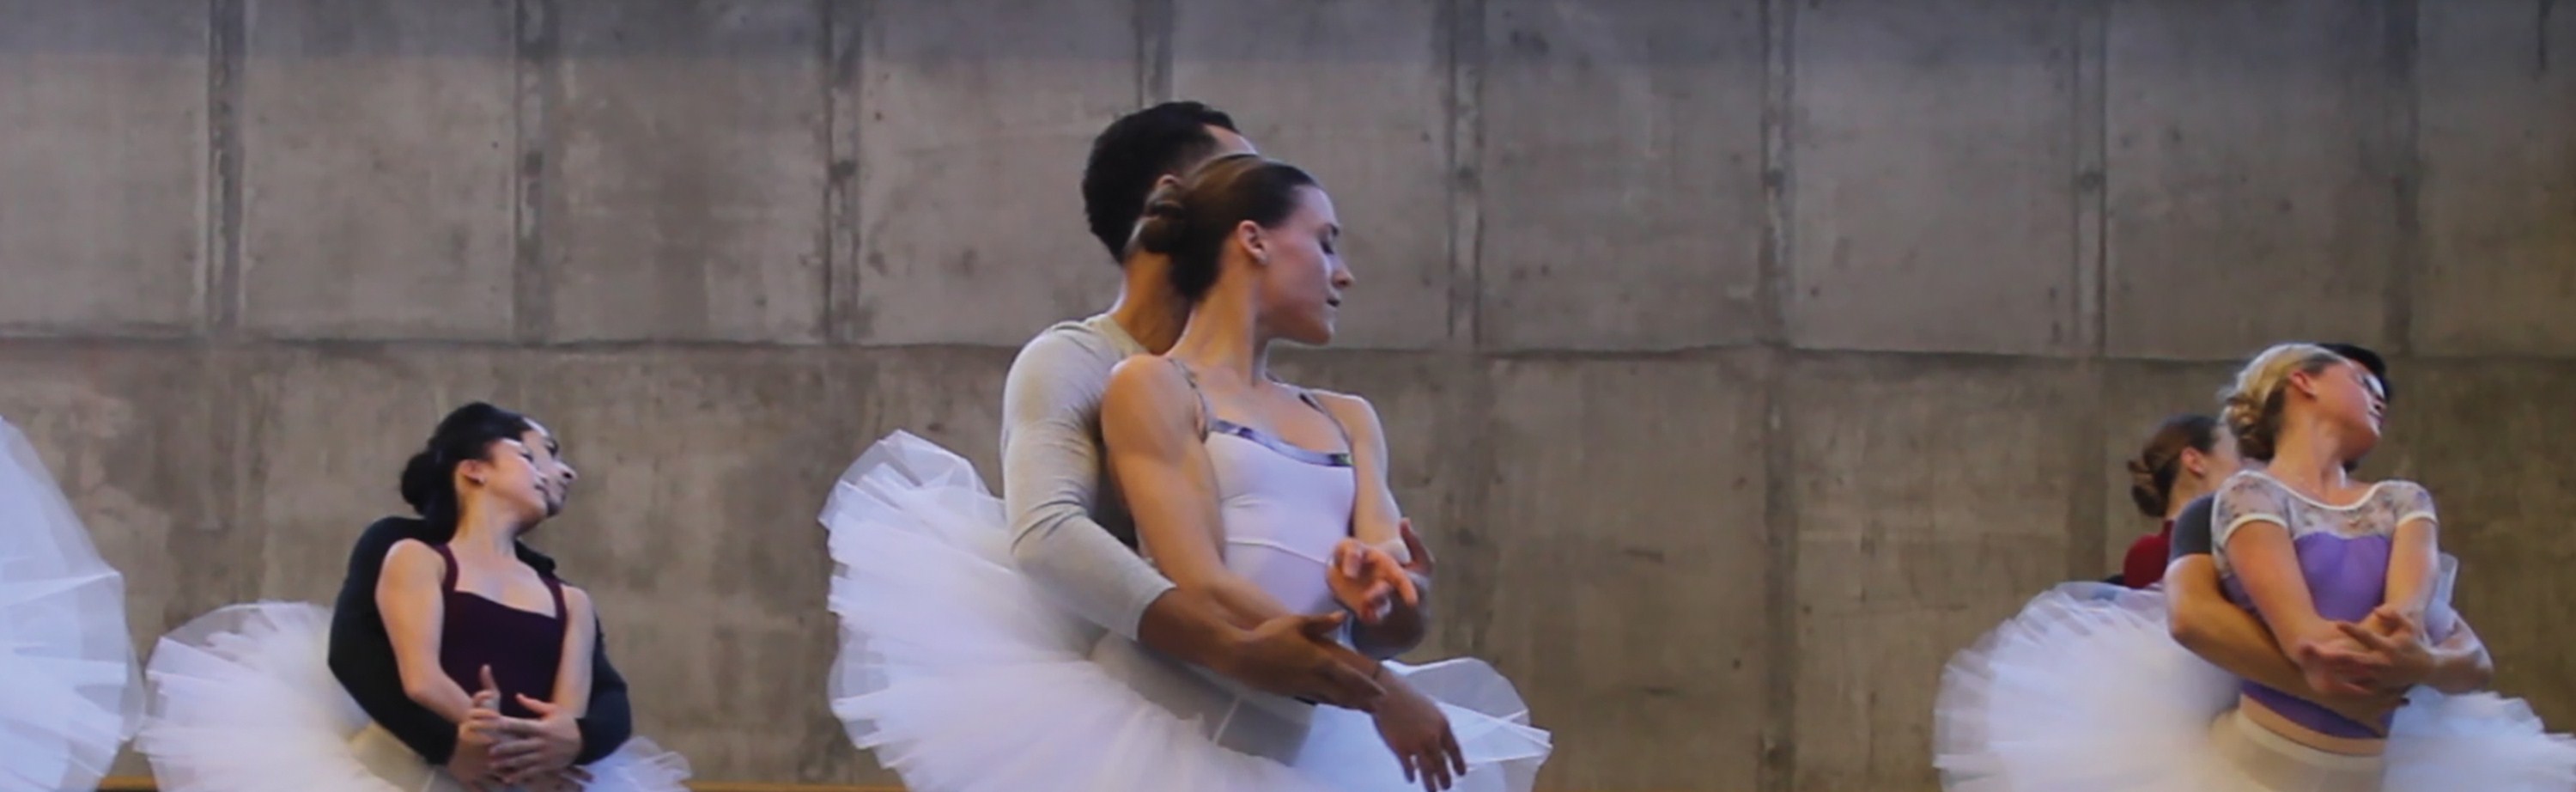 TWO HEARTS THAT BEAT AS ONE: KC Ballet presents its first full-length ‘Swan Lake’